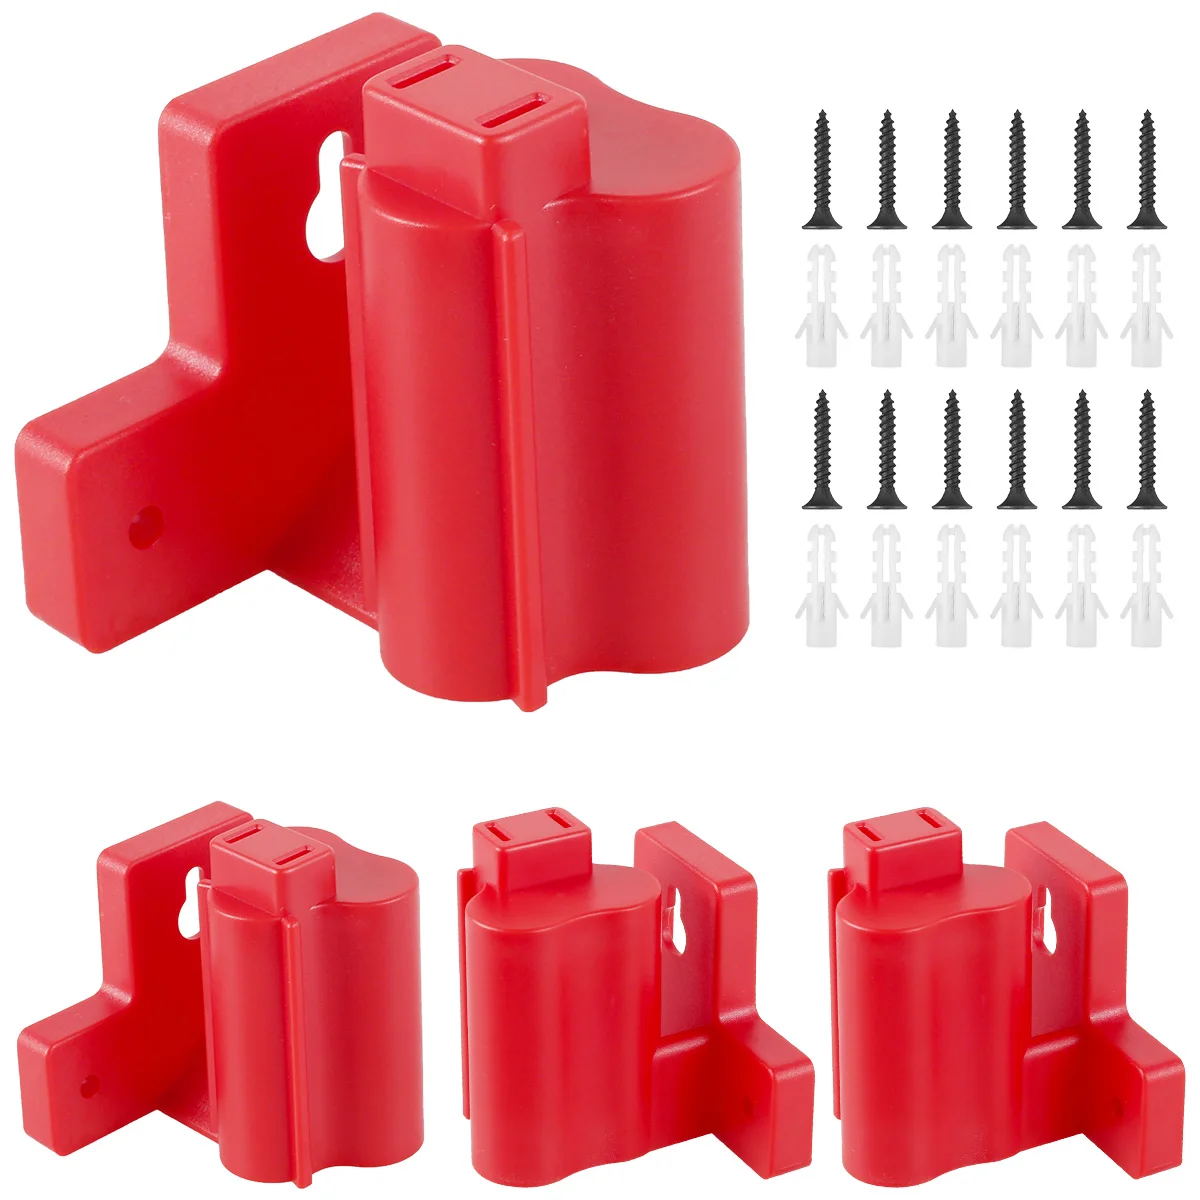 

4Pcs Battery Mount Holder Plastic Electric Tool Battery Dock Holder Heavy Duty Power Tool Hanger with Screws for Milwaukee M12